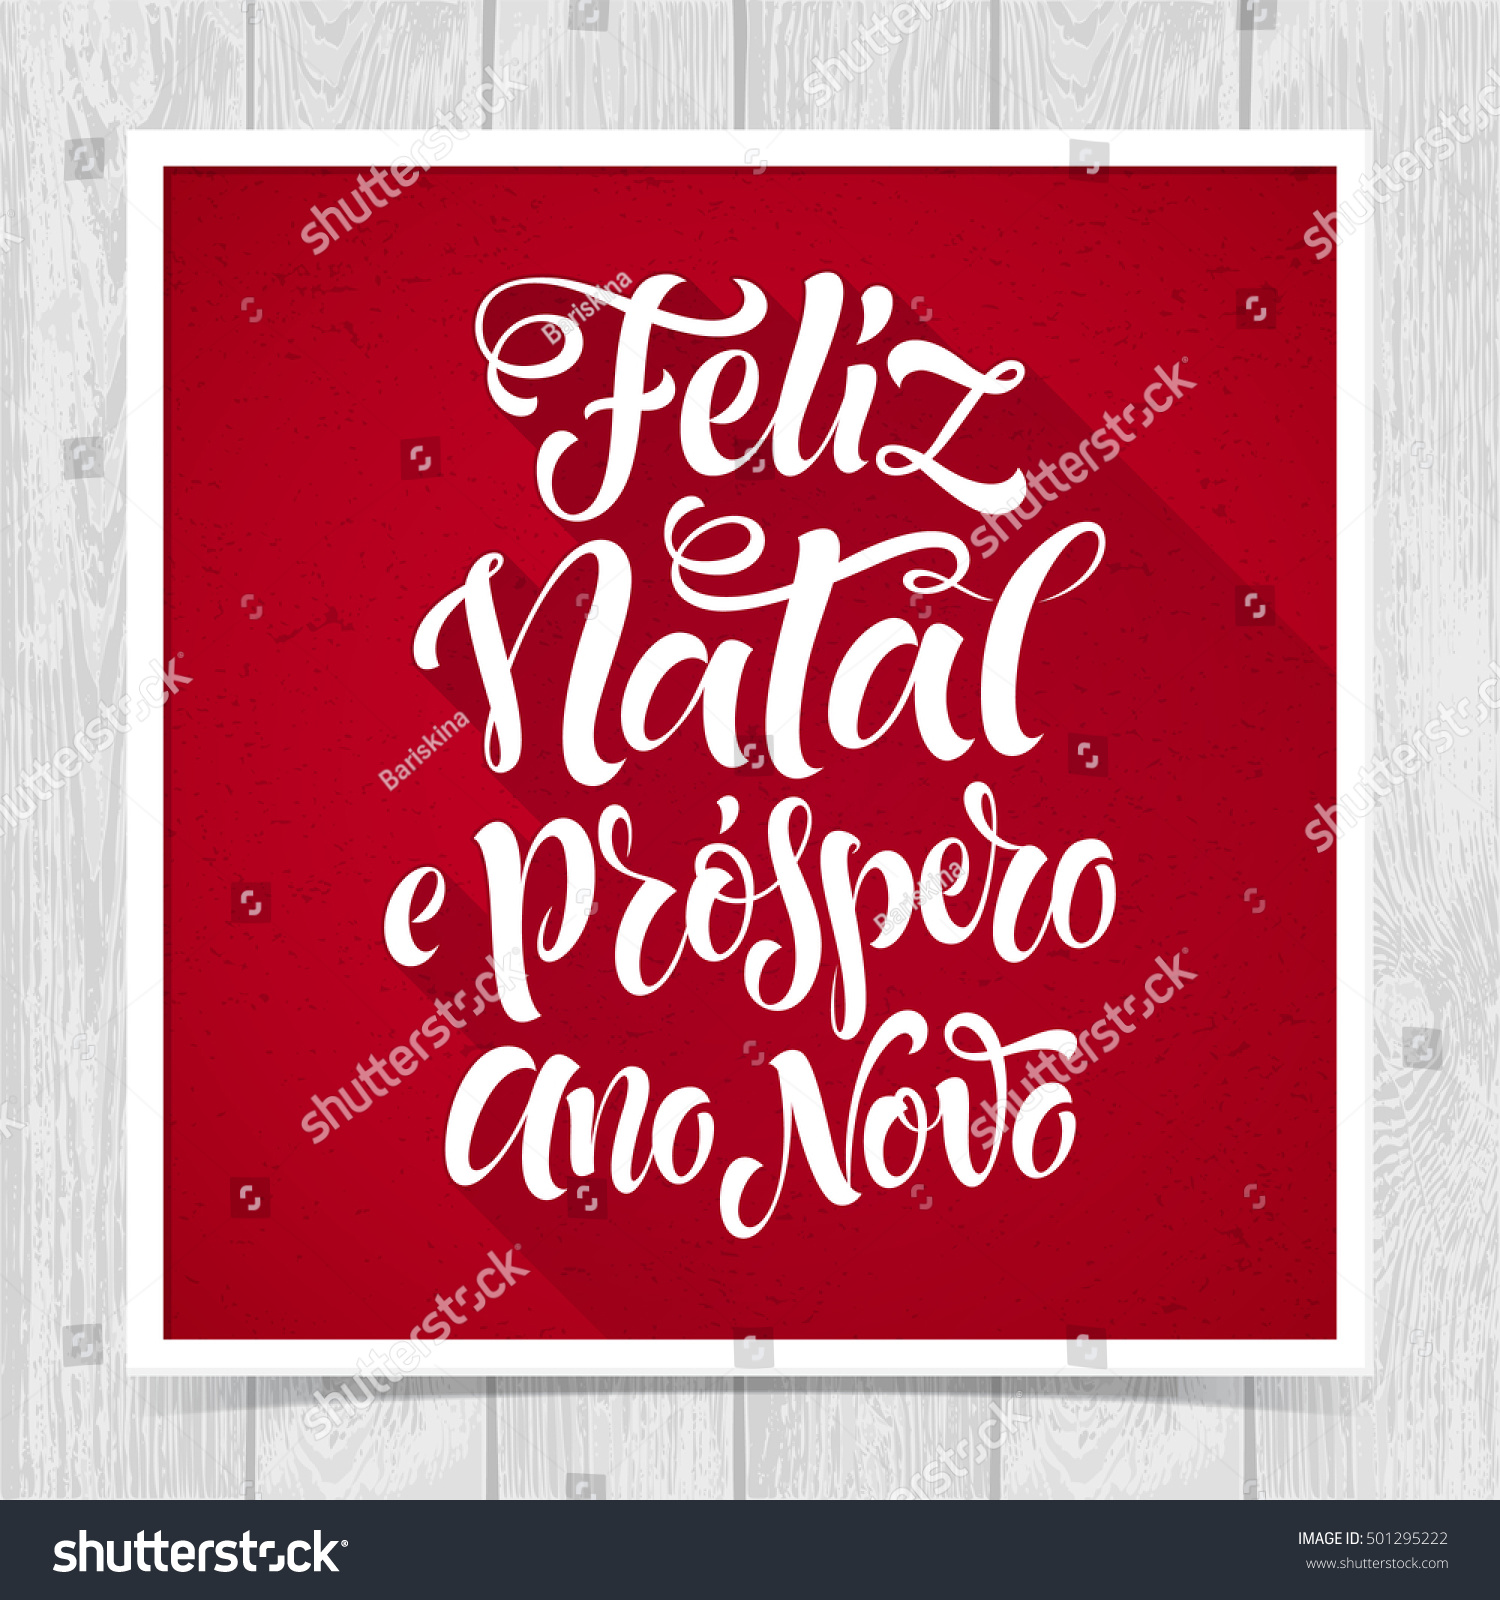 Merry Christmas and Happy New Year text in Italian Buon Natale e Felice Anno Nuovo